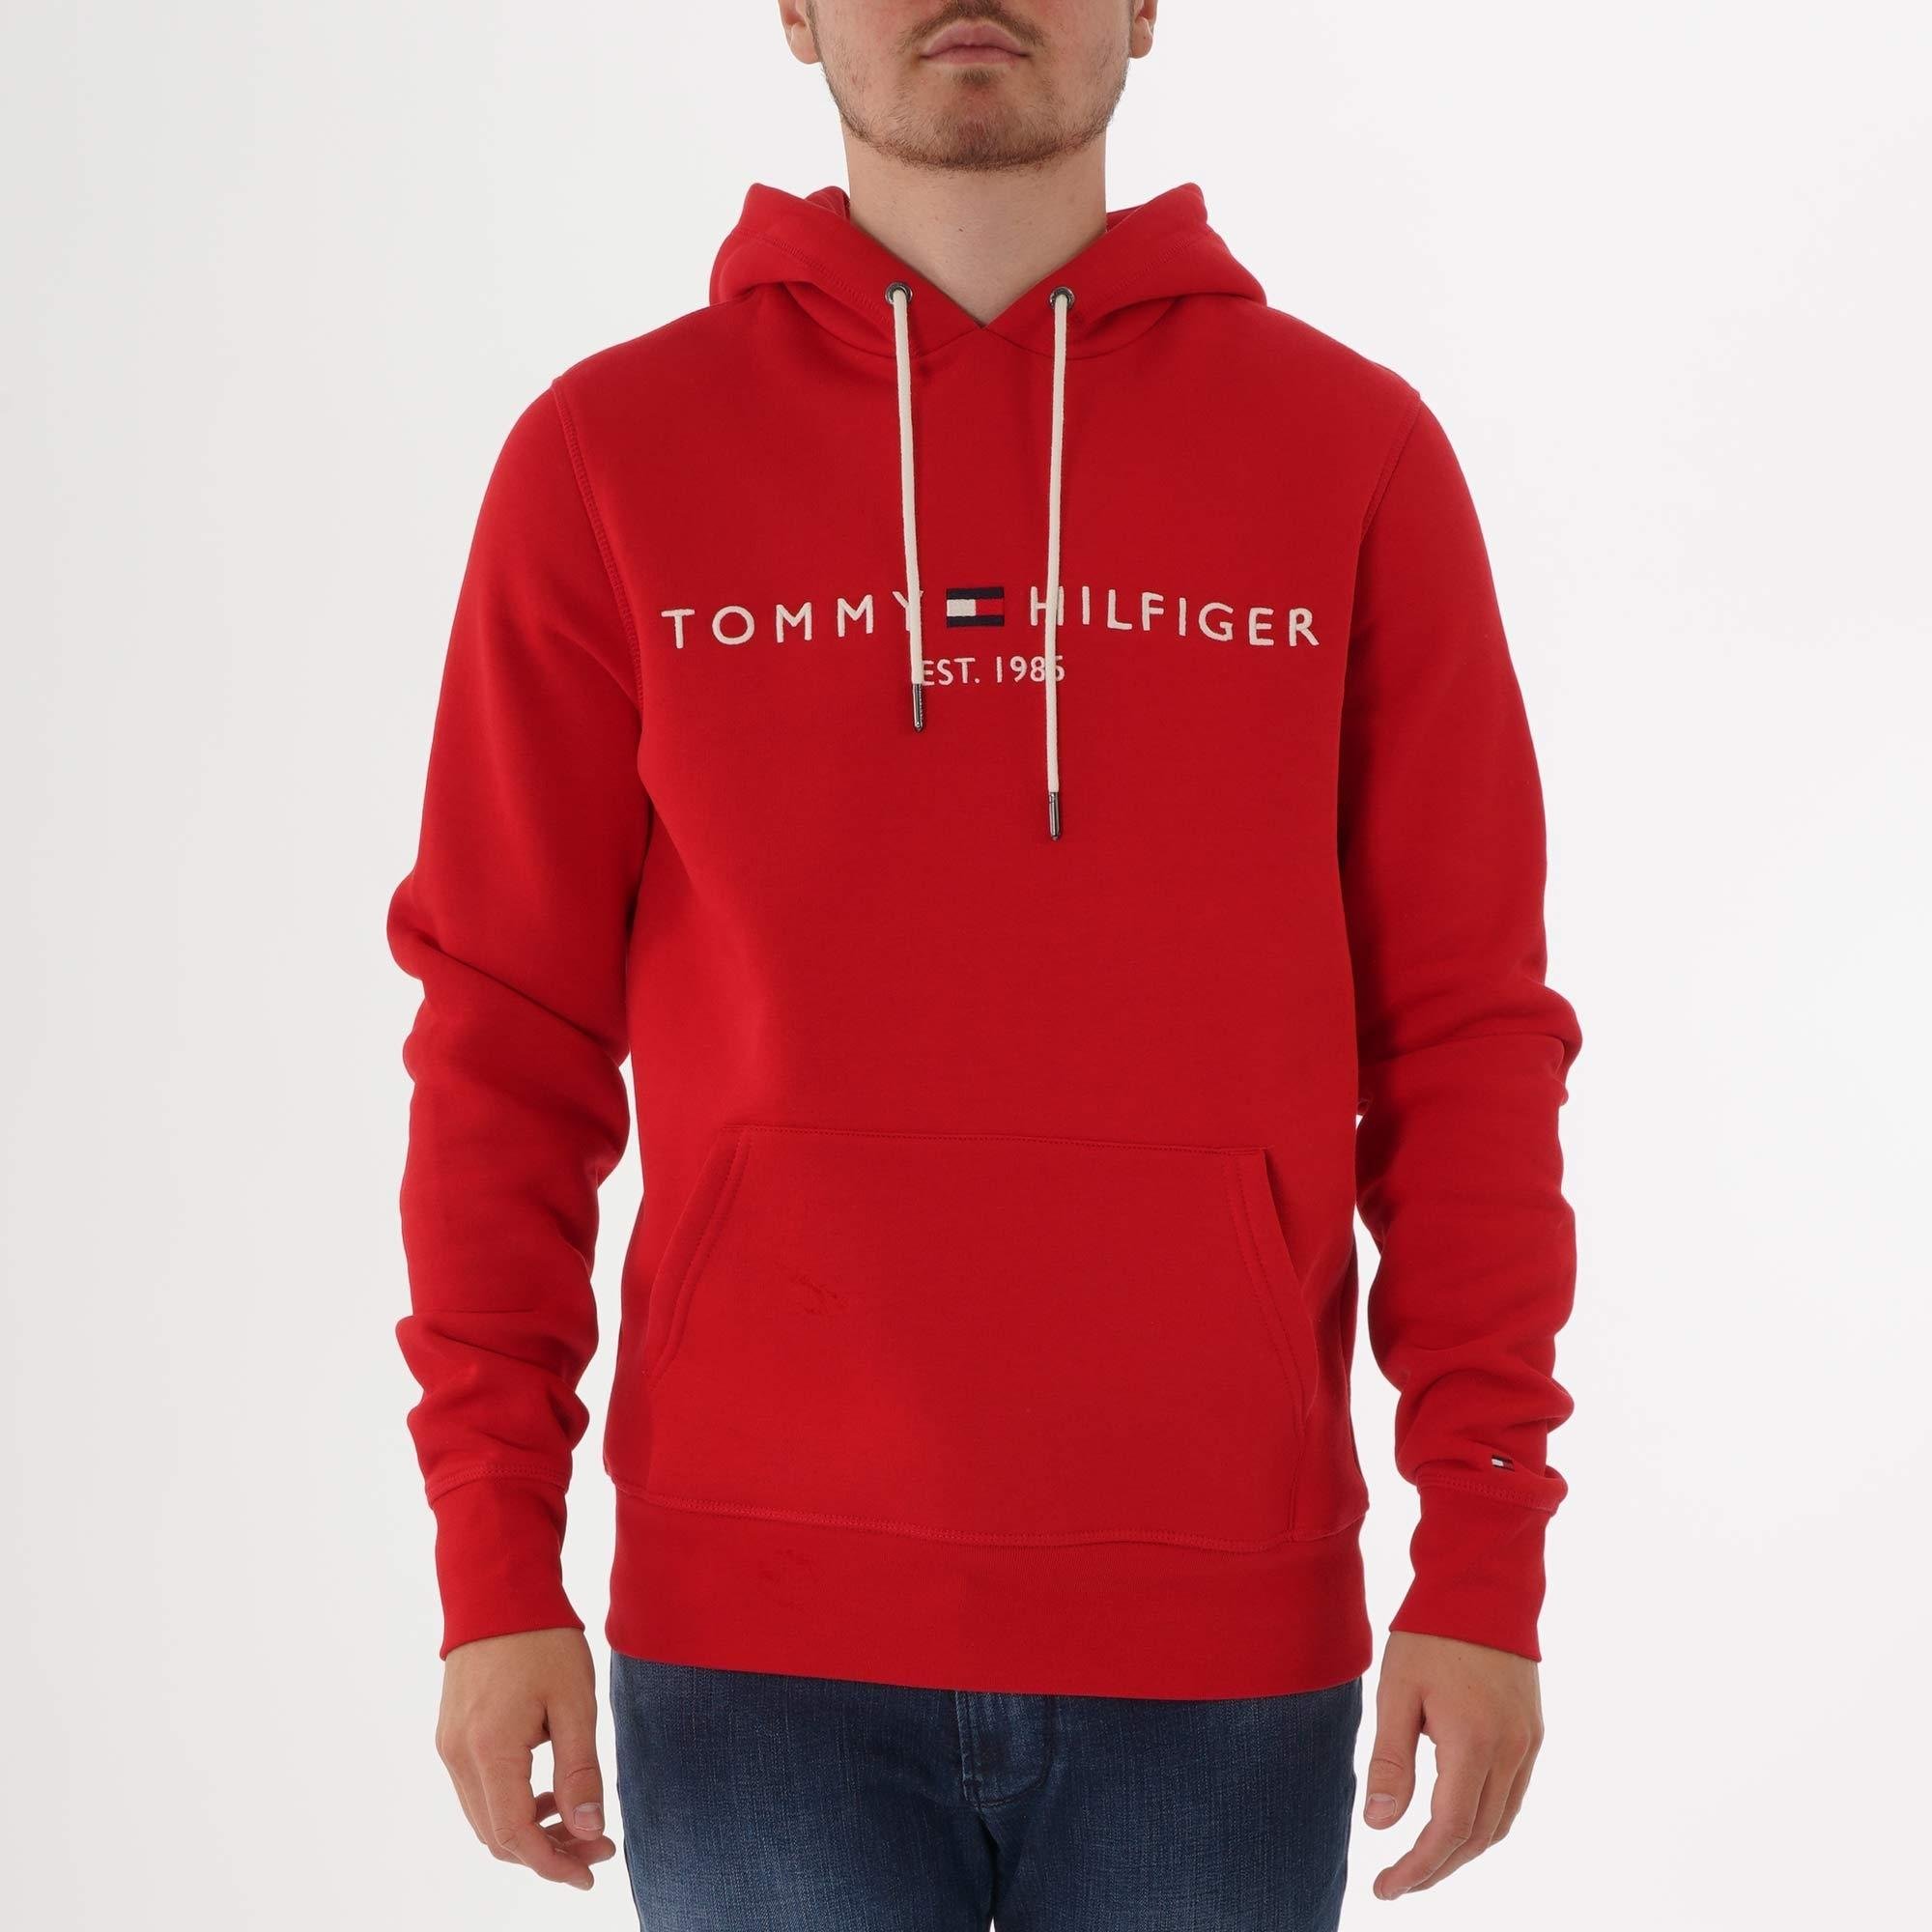 Tommy Hilfiger Tommy Logo Hoodie in Red for Men - Lyst